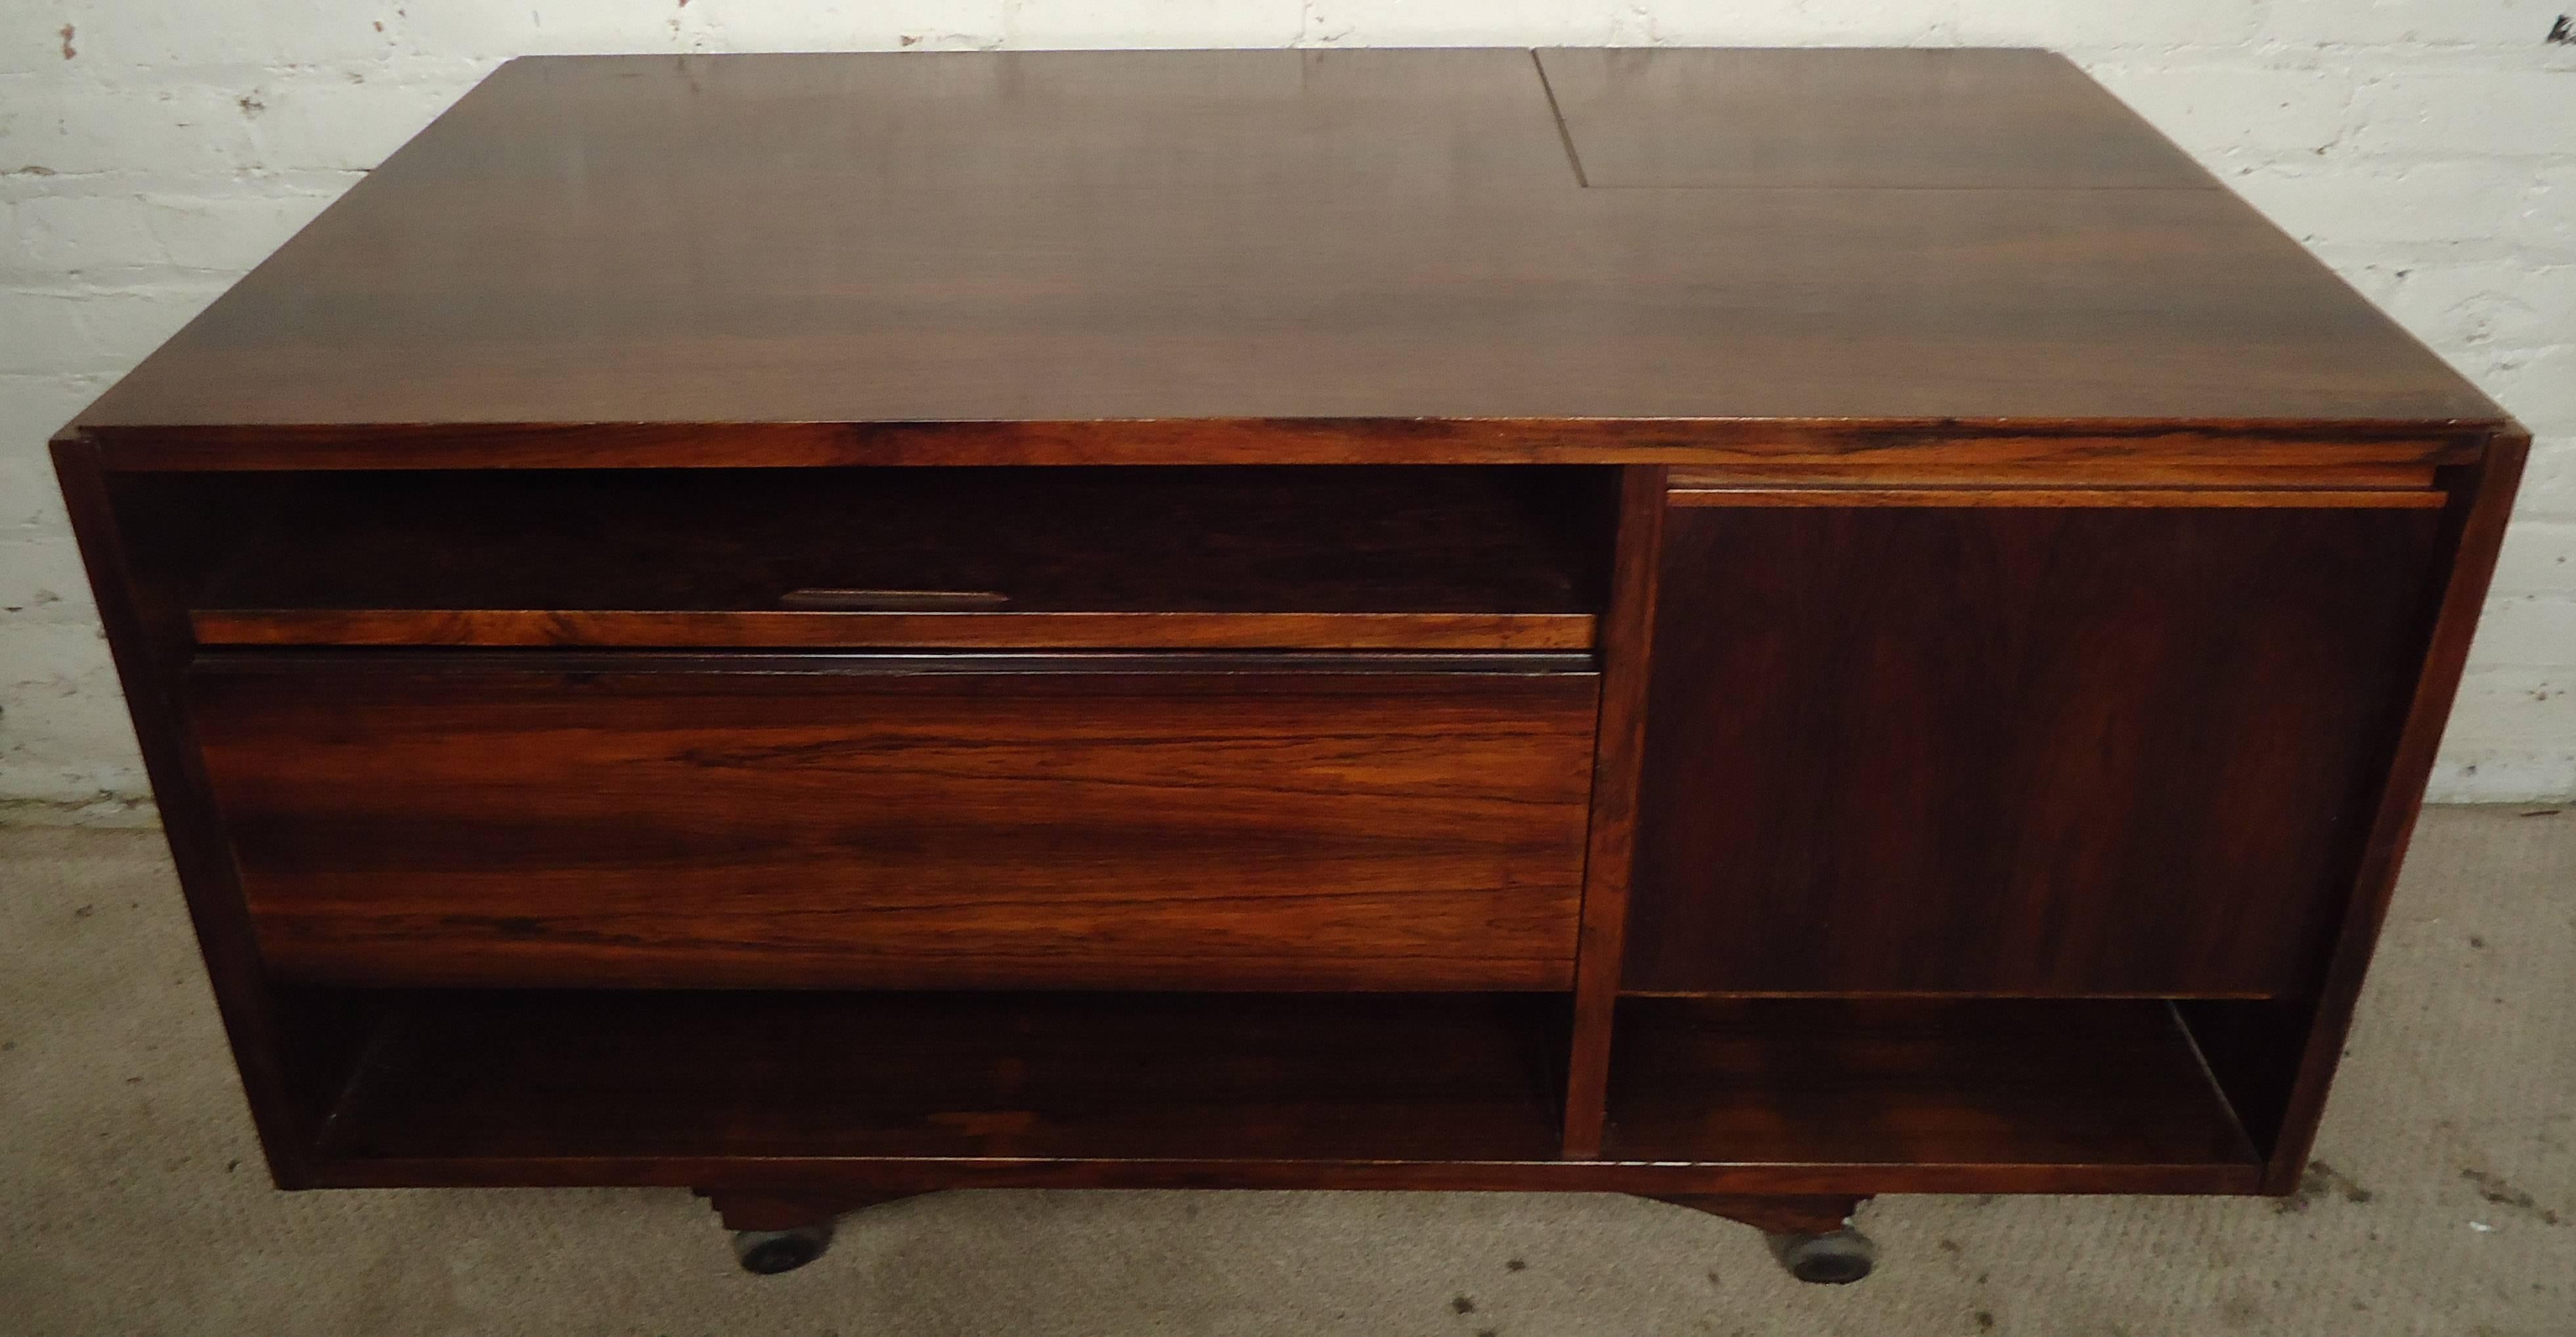 Vintage-modern rolling cabinet, featuring unique storage design and beautiful rosewood grain throughout.

Please confirm item location NY or NJ with dealer.